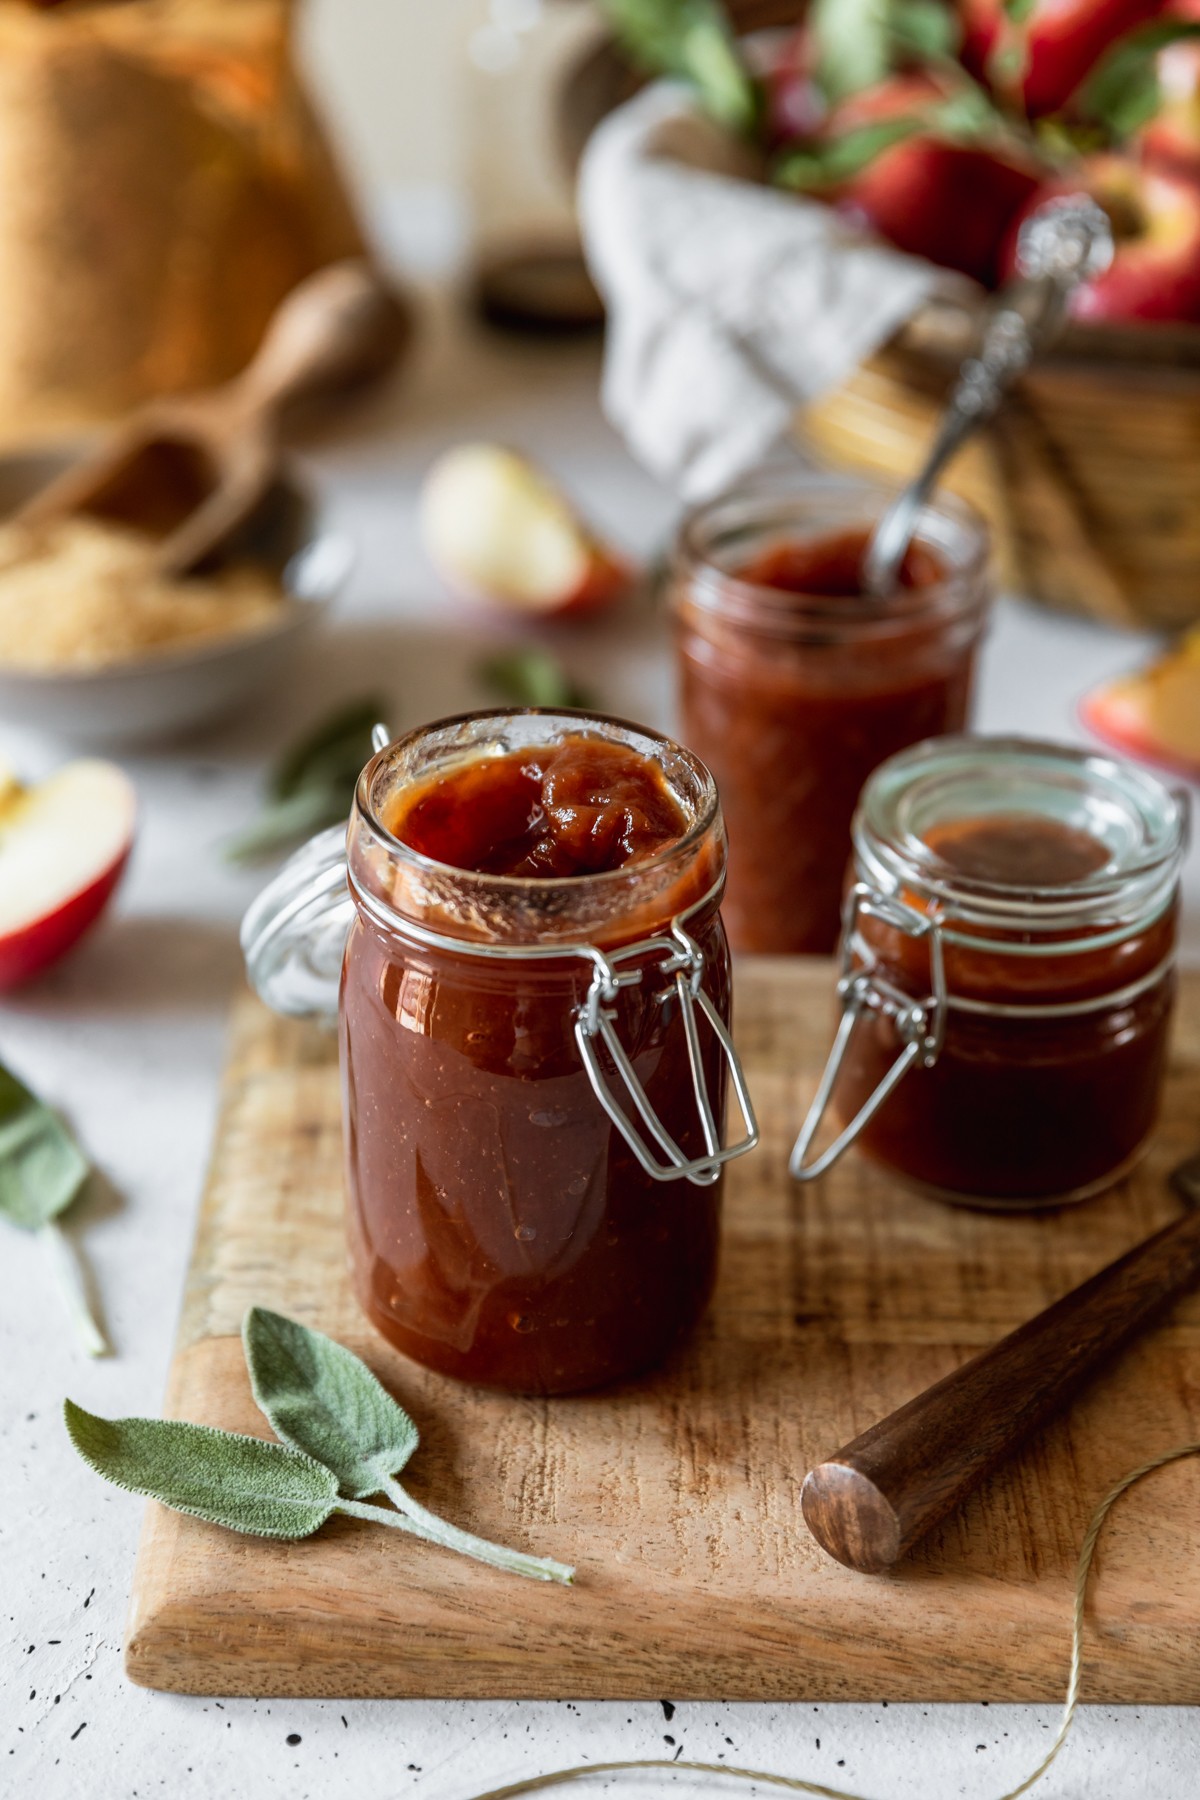 A closeup image of a jar of apple butter on a wood board placed on a white counter. In the background are two more jars of apple butter, a basket of apples, sliced apples, and sage leaves.